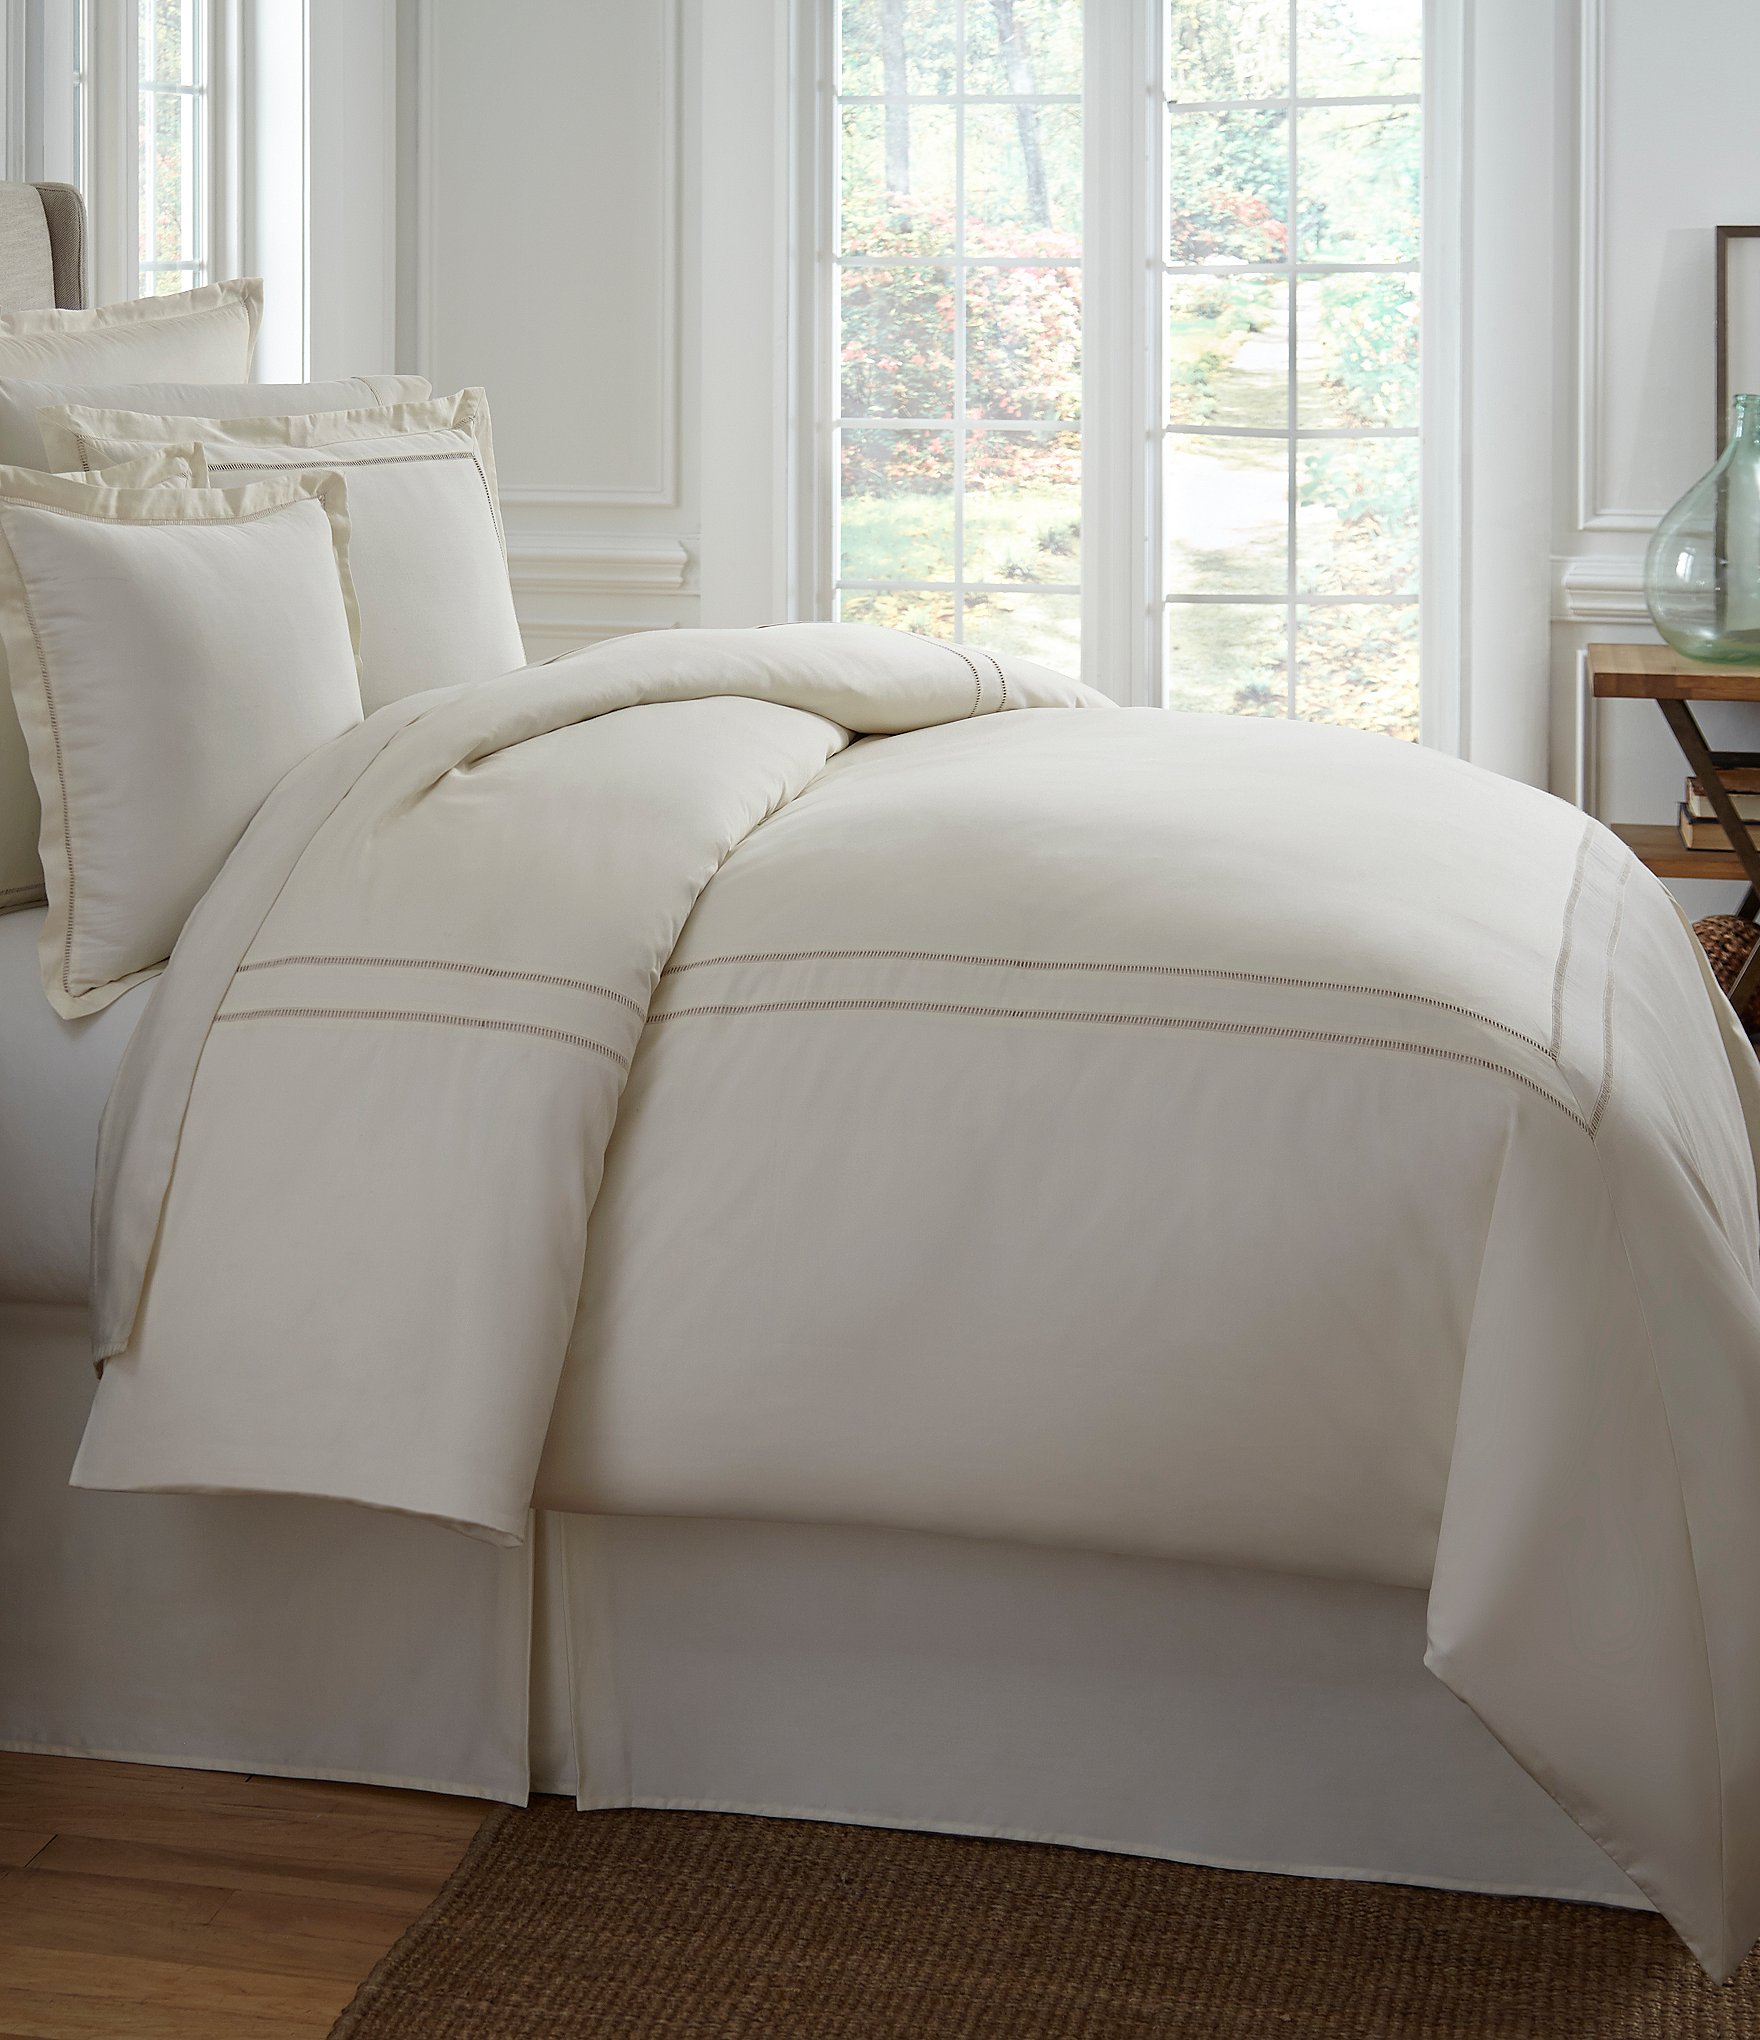 Southern Living Heirloom 500 Thread Count Sateen Twill Comforter